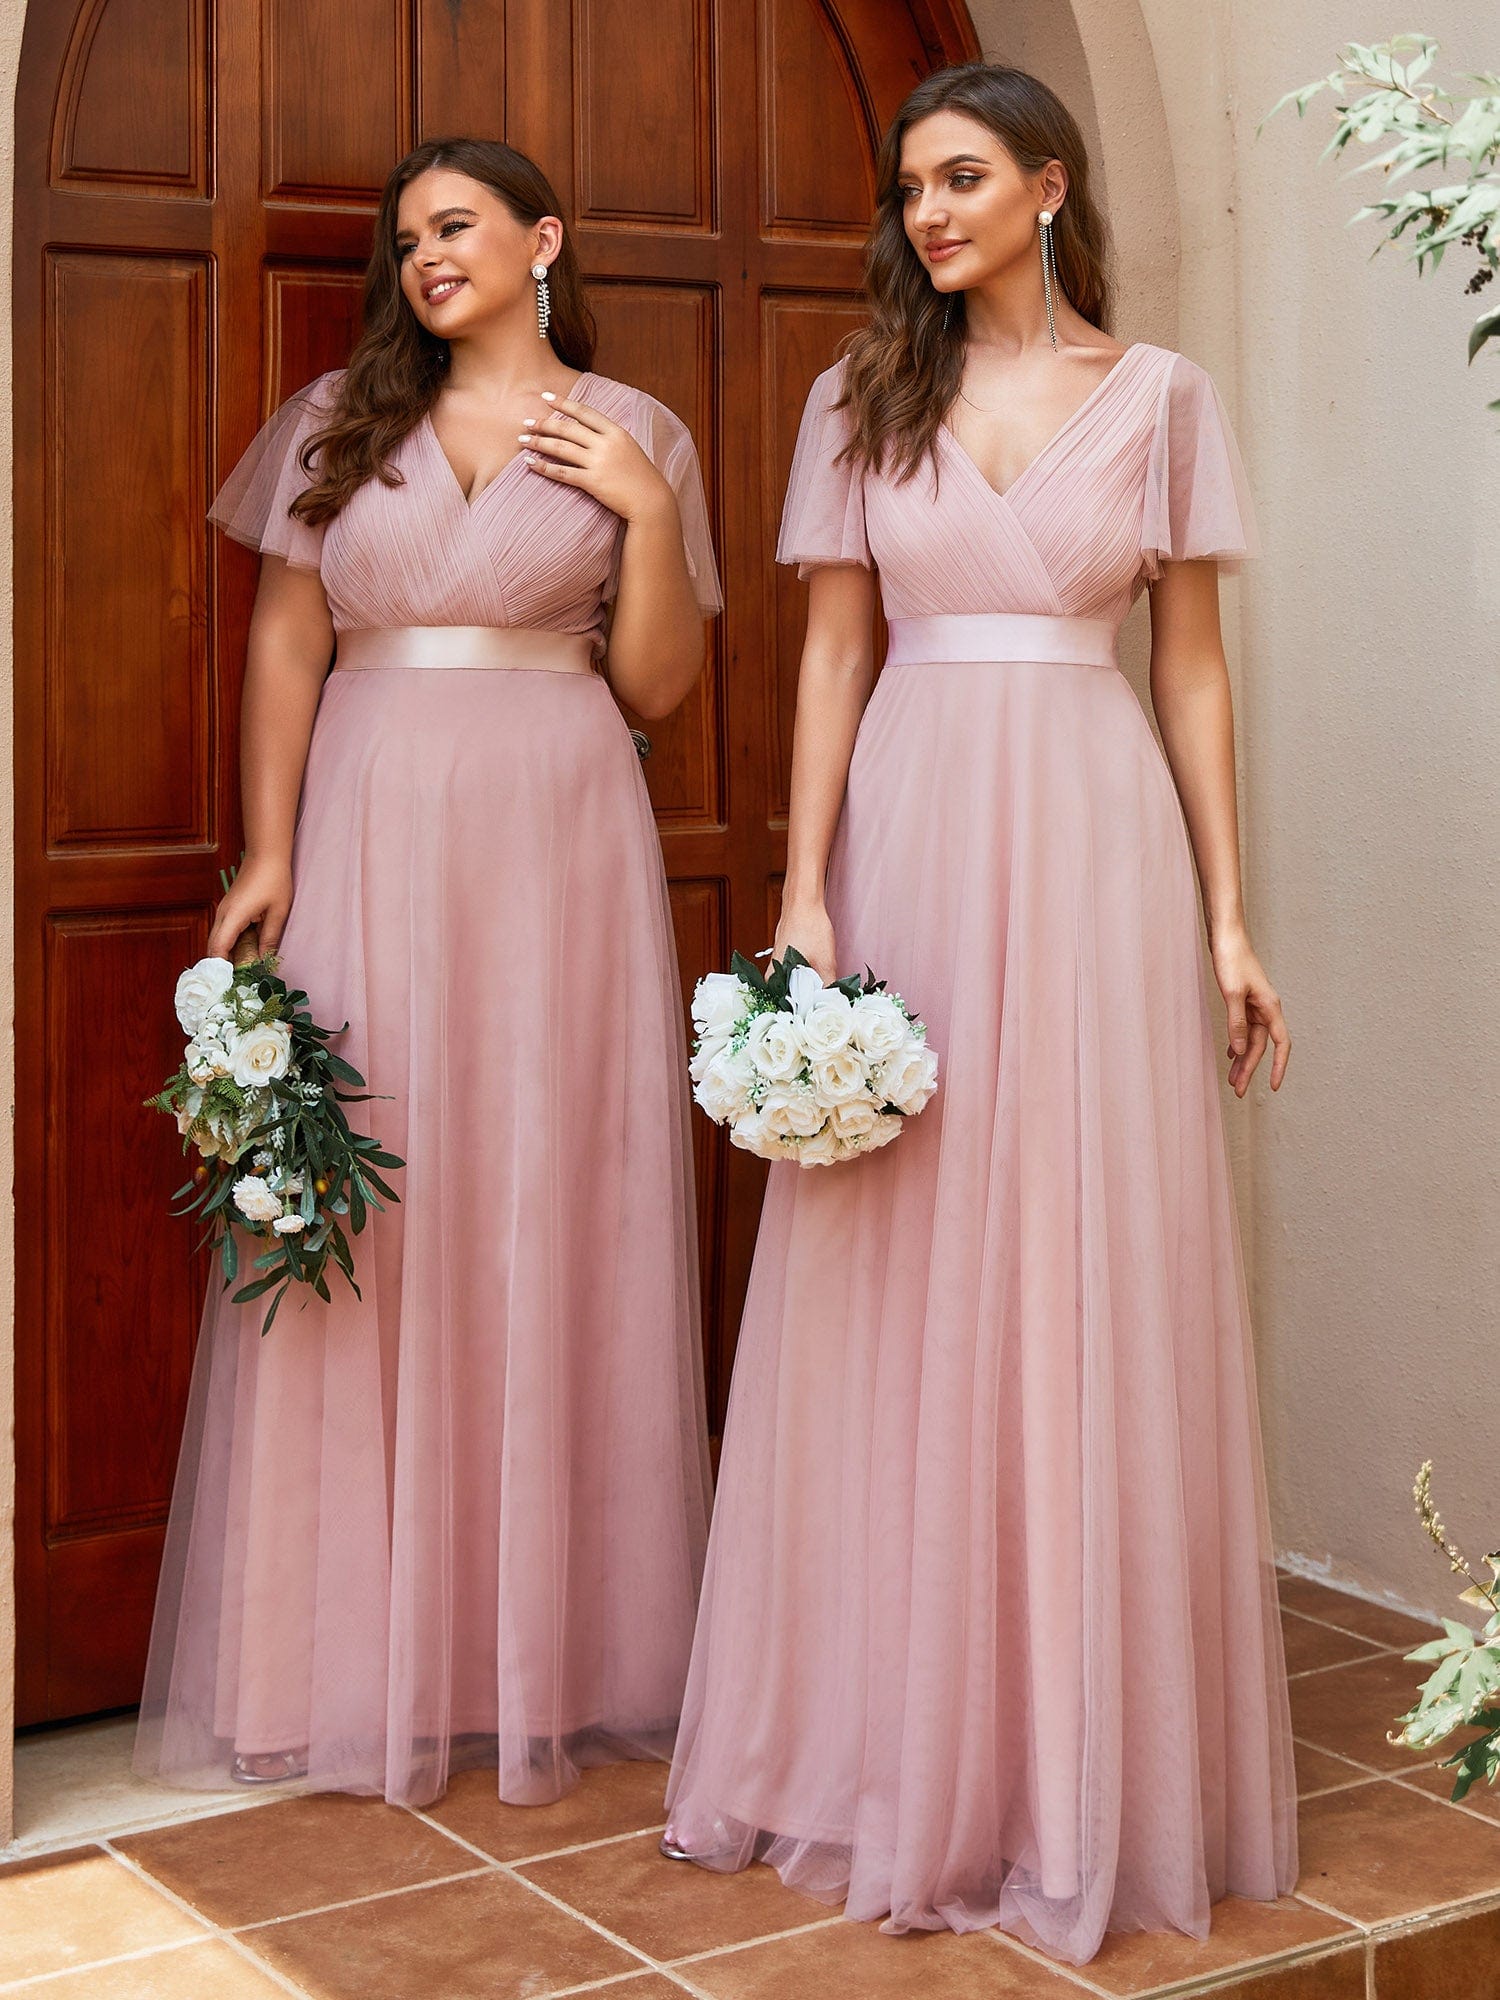 What Are the Most Popular Bridesmaid Dress Colors 2023 on Ever Pretty?